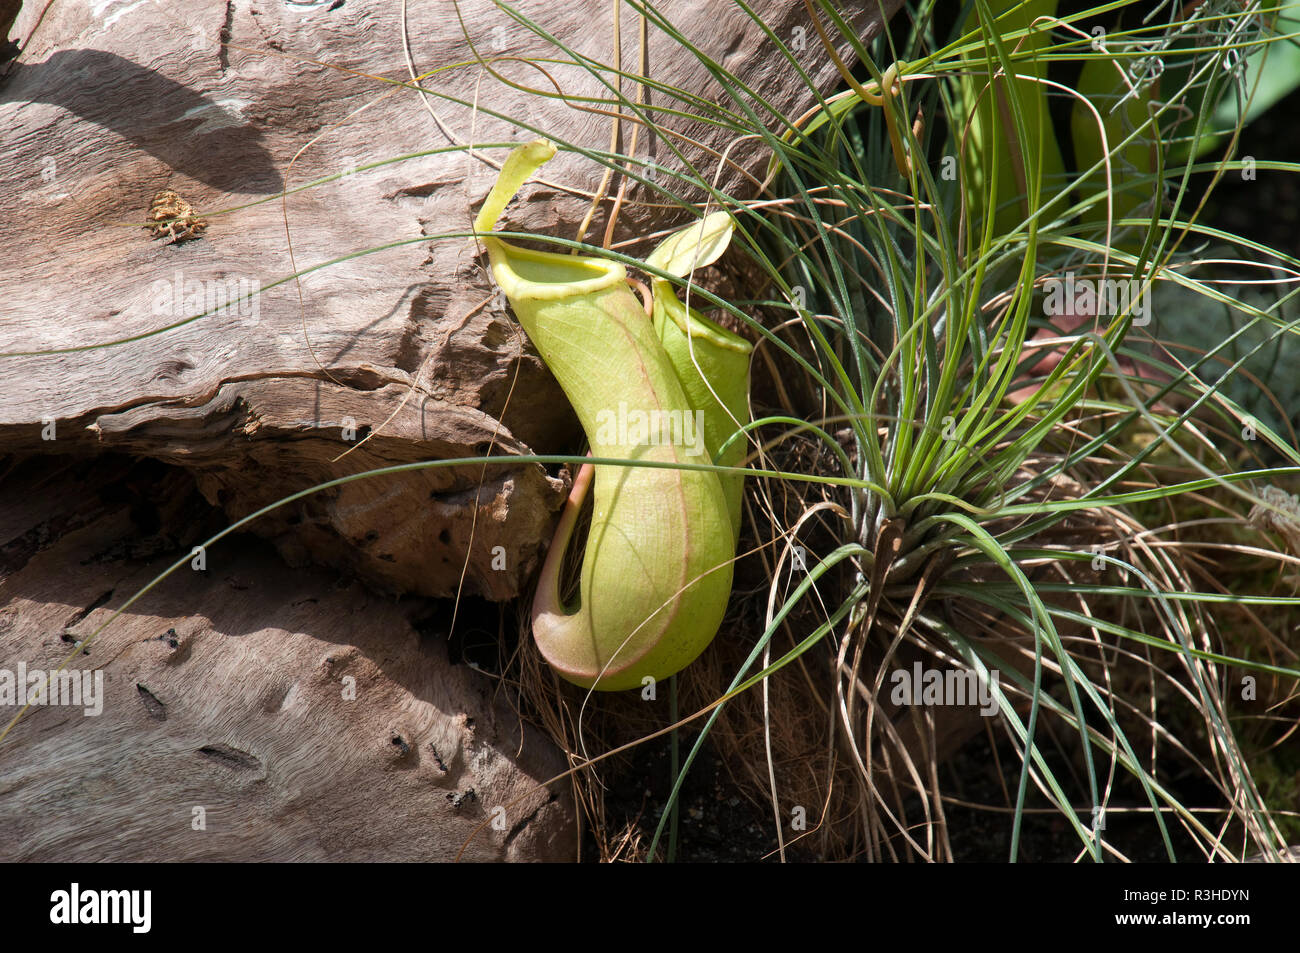 Sydney Australia, Hanging pitcher plant with airplant on driftwood Stock Photo